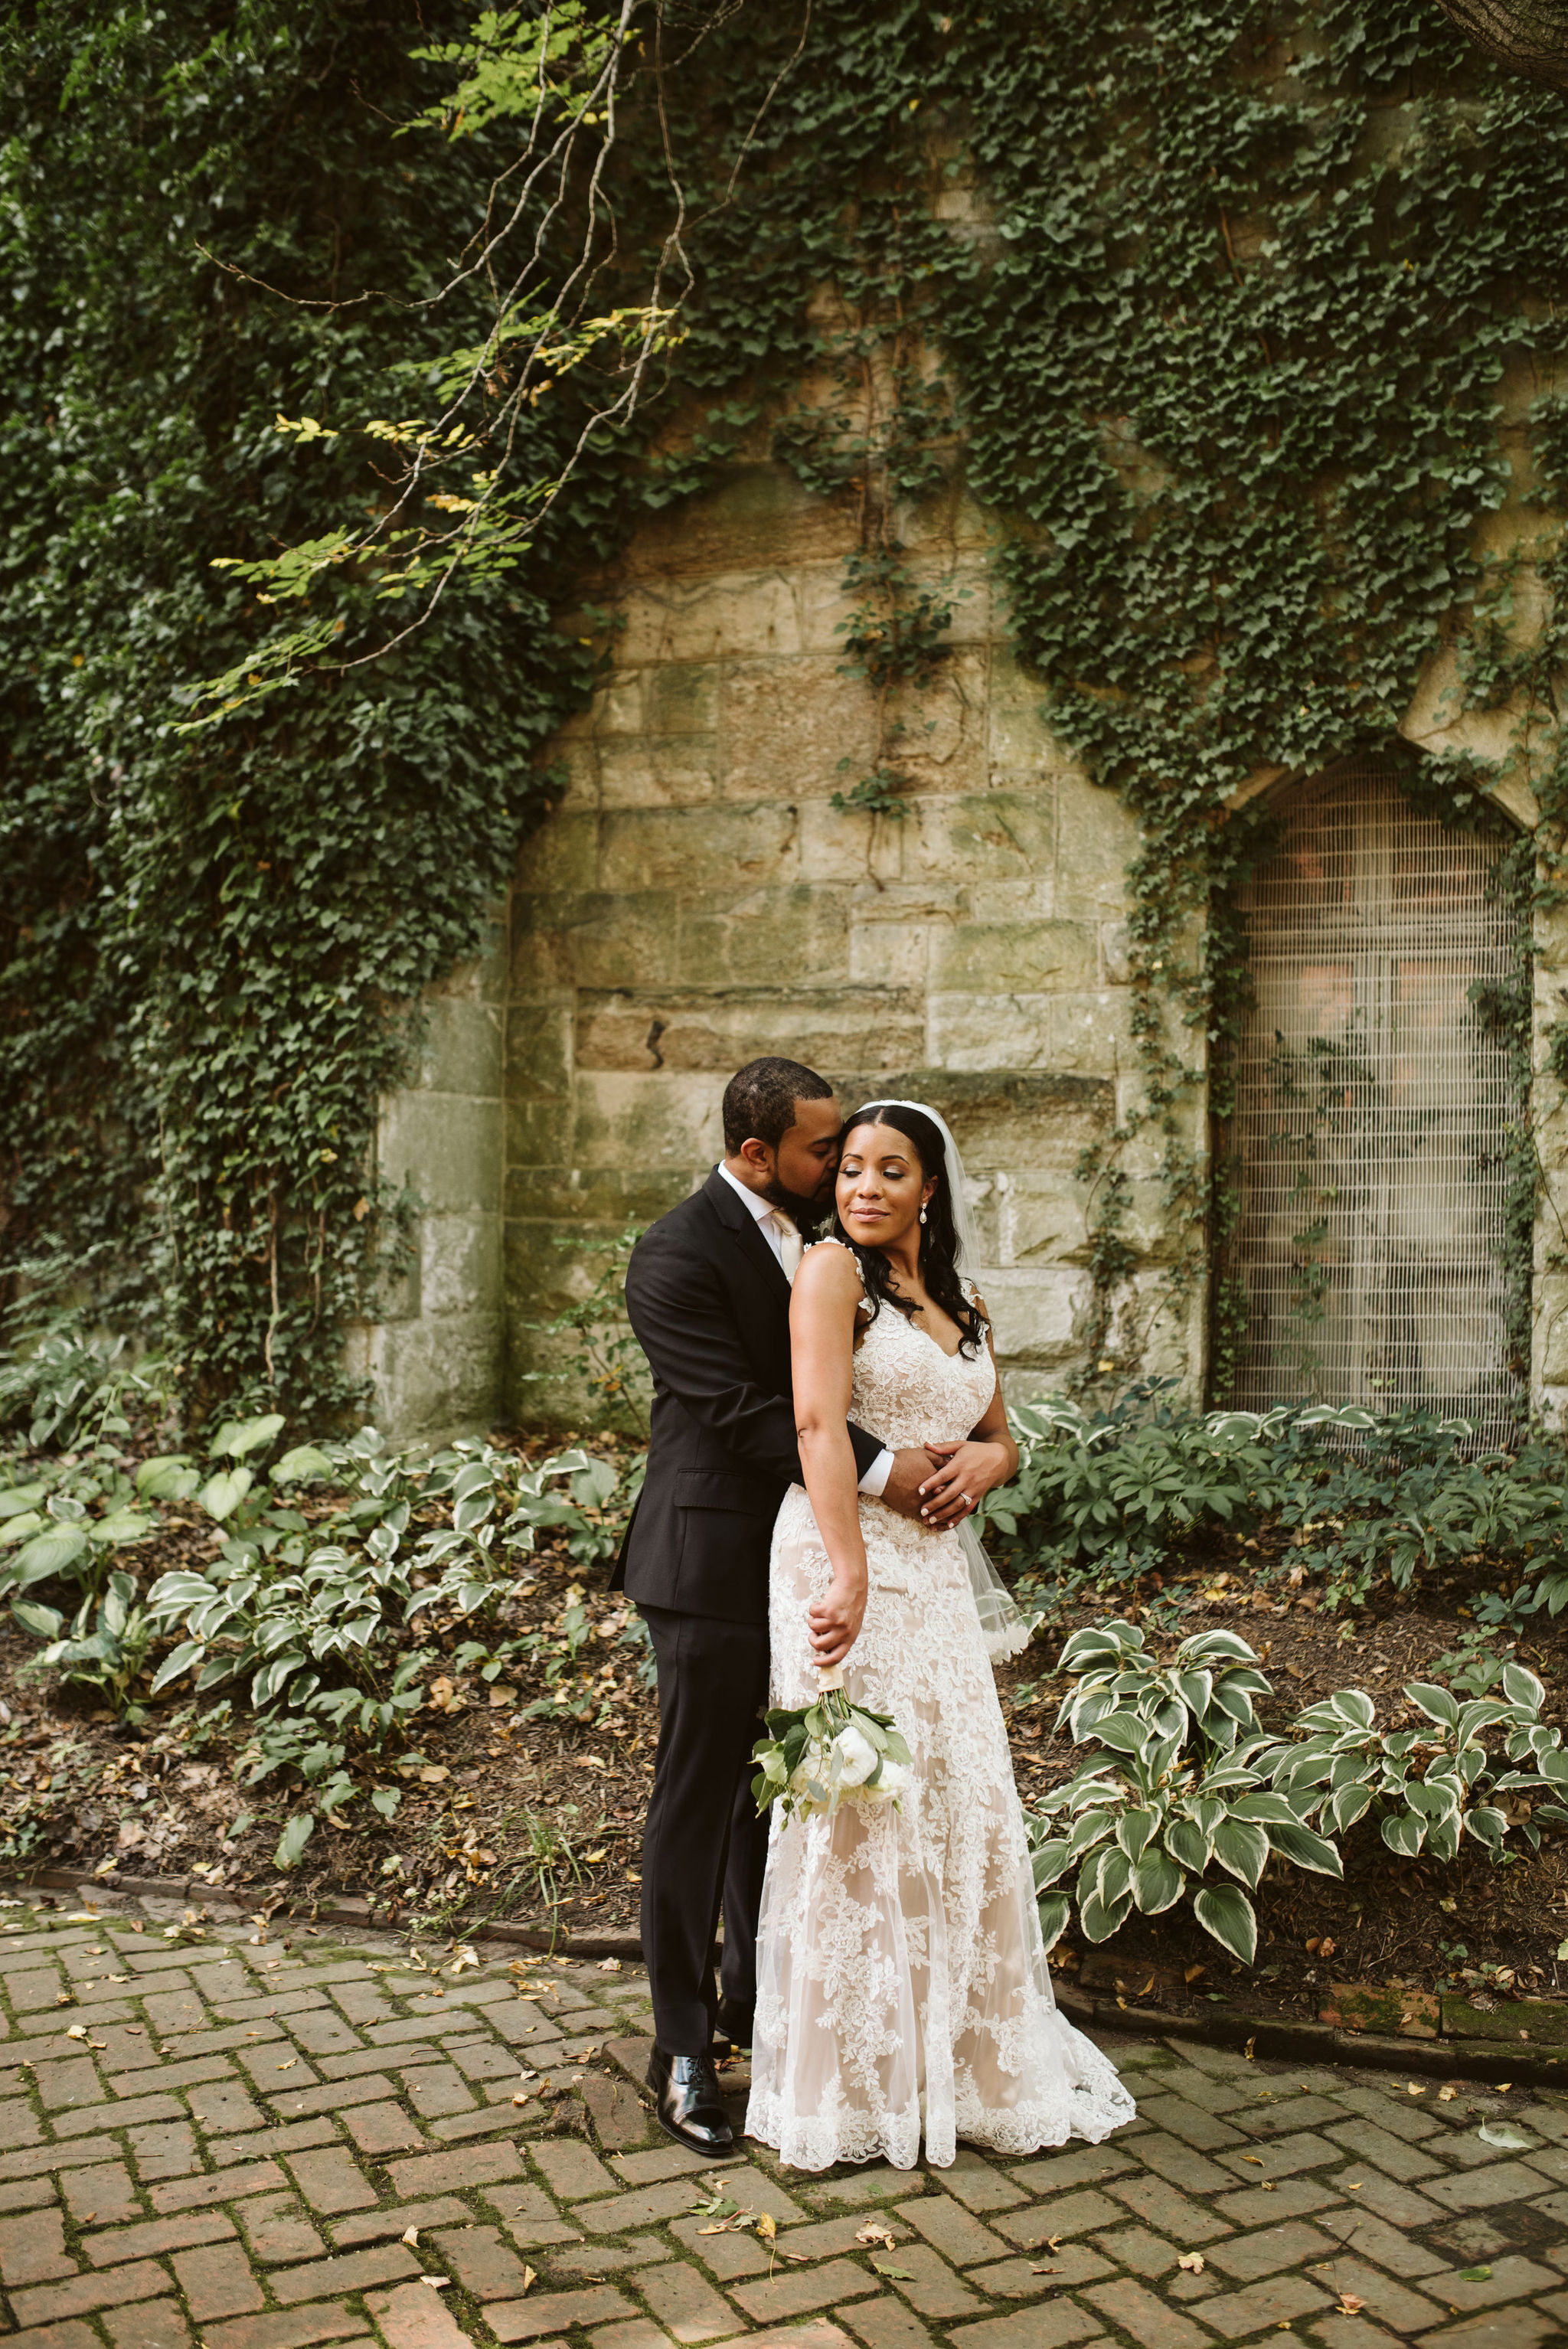  Baltimore, Maryland Wedding Photographer, Mount Vernon, Chase Court, Classic, Outdoor Ceremony, Garden, Romantic, Groom Hugging Bride from Behind, bride Looking Back at Groom, Lace Wedding Dress 